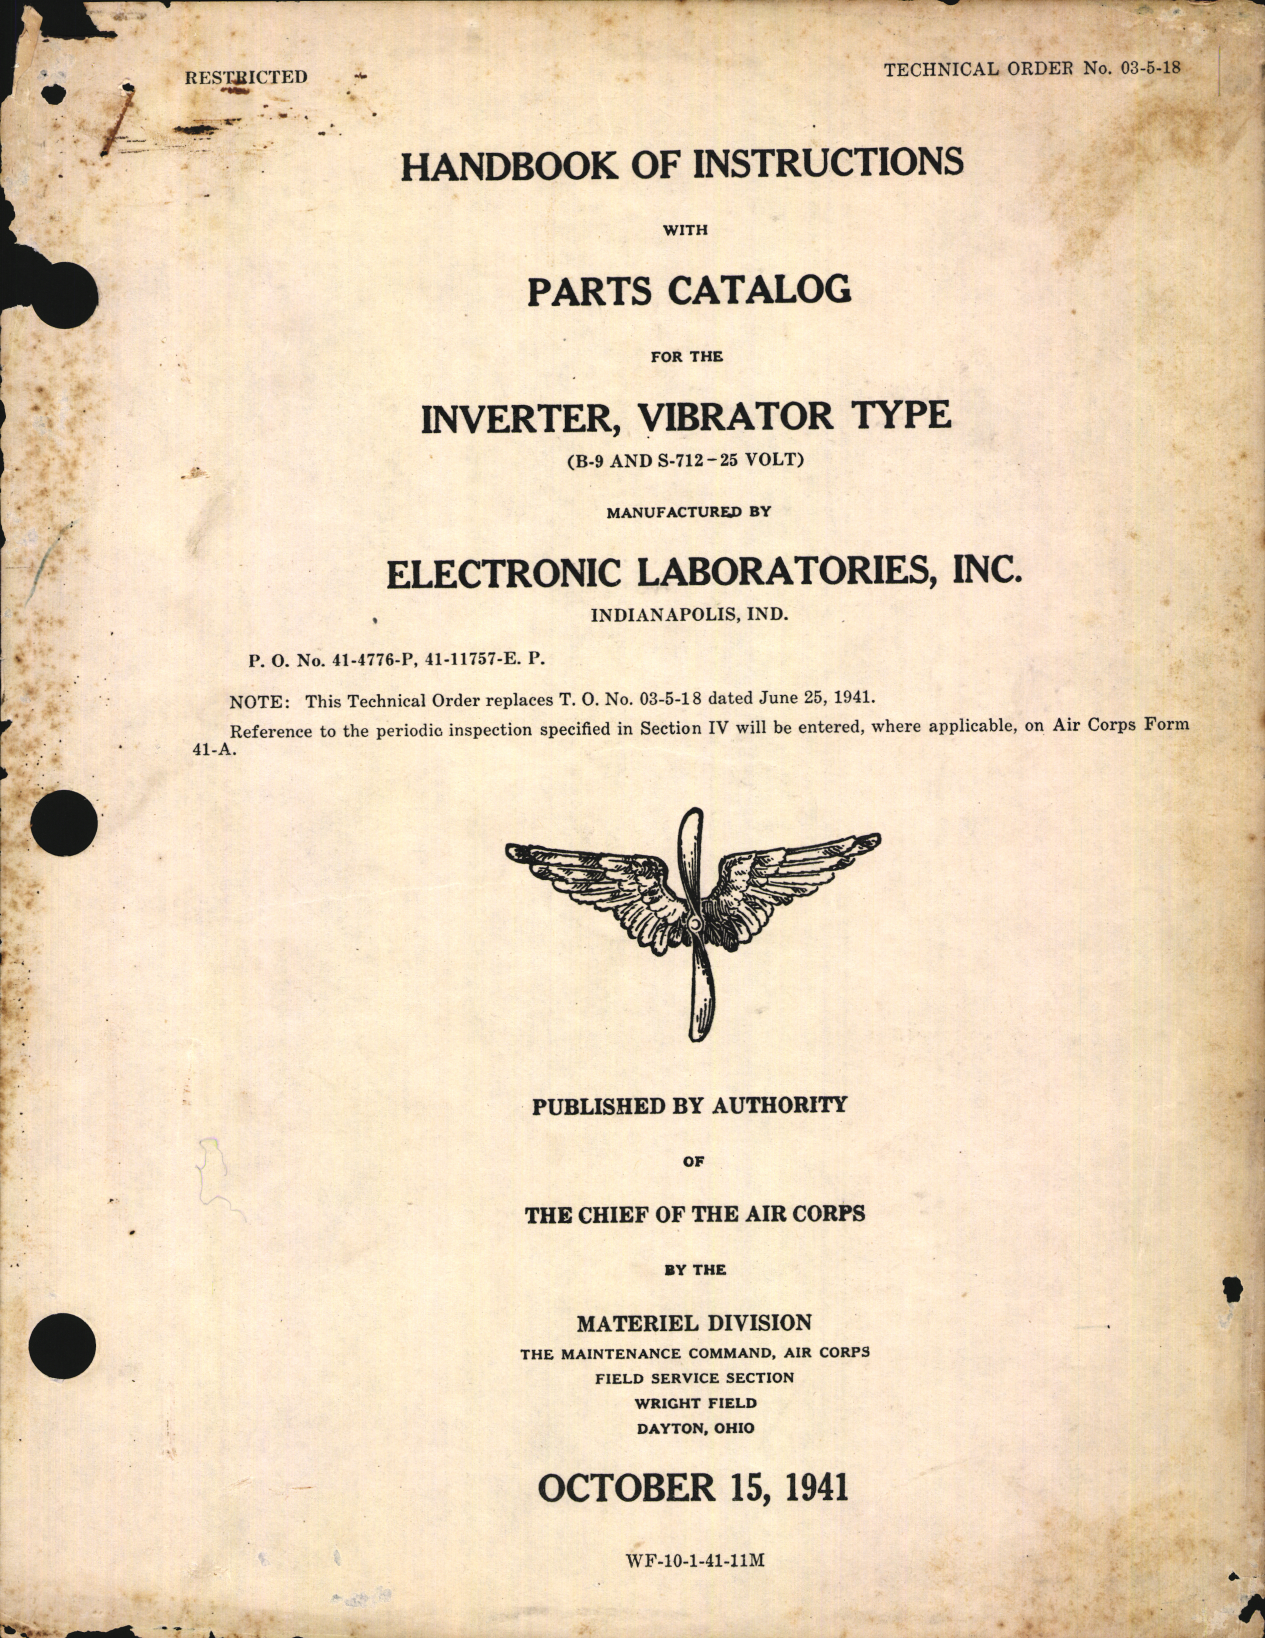 Sample page 1 from AirCorps Library document: Handbook of Instructions with Parts Catalog for Inverter, Vibrator Type B-9 and S-712 - 25 Volt